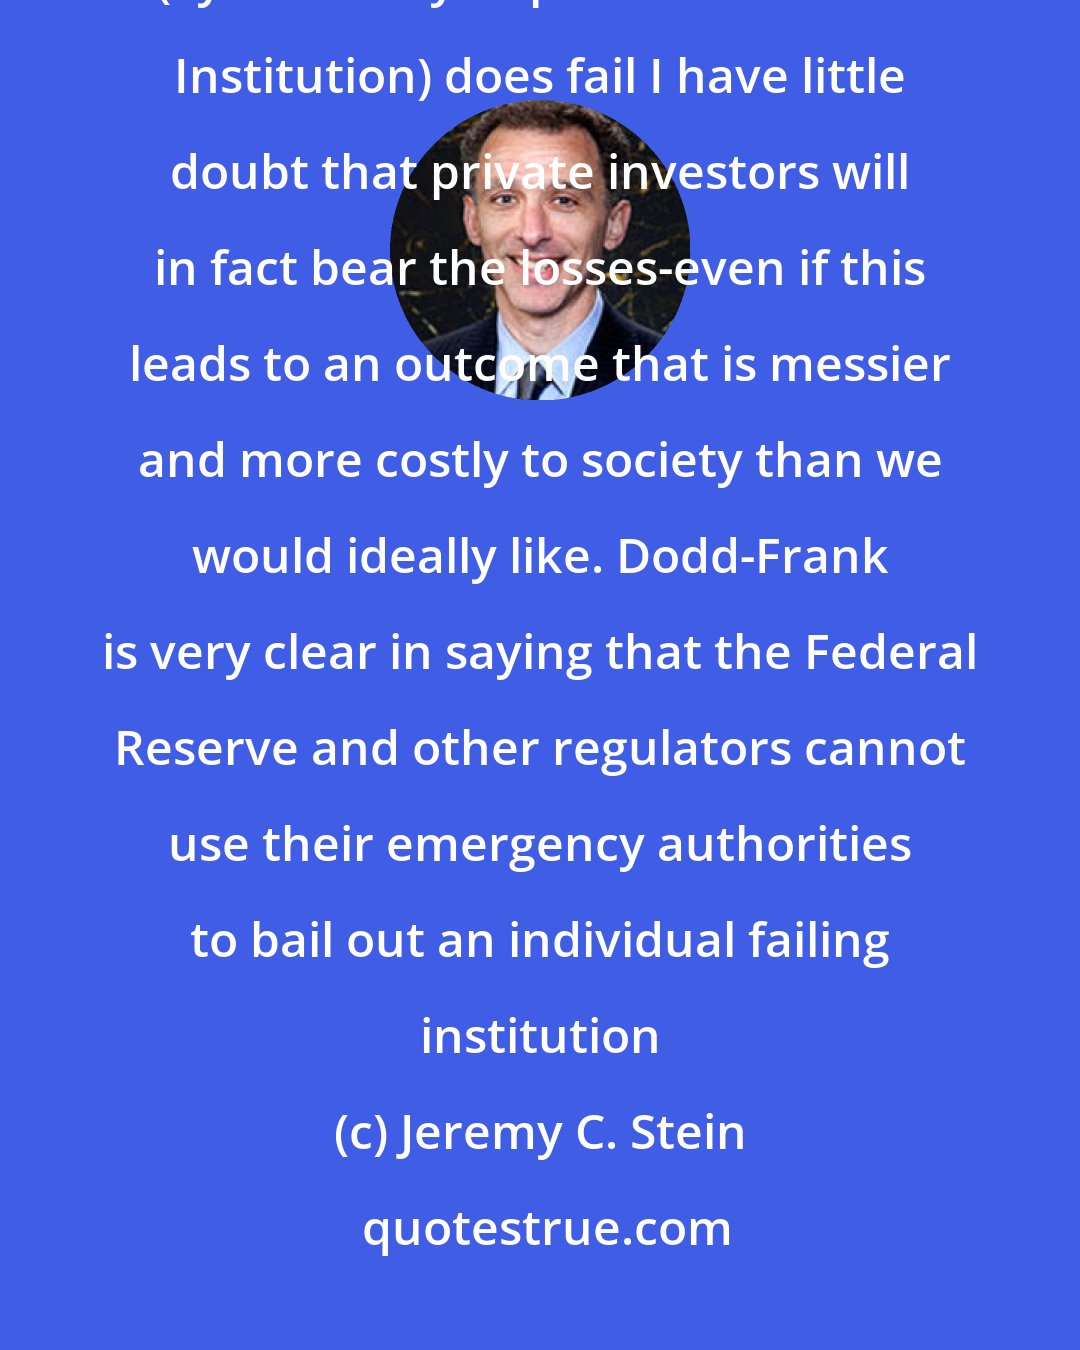 Jeremy C. Stein: Perhaps more to the point for TBTF (Too Big To Fail bank), if a SIFI (Systemically Important Financial Institution) does fail I have little doubt that private investors will in fact bear the losses-even if this leads to an outcome that is messier and more costly to society than we would ideally like. Dodd-Frank is very clear in saying that the Federal Reserve and other regulators cannot use their emergency authorities to bail out an individual failing institution